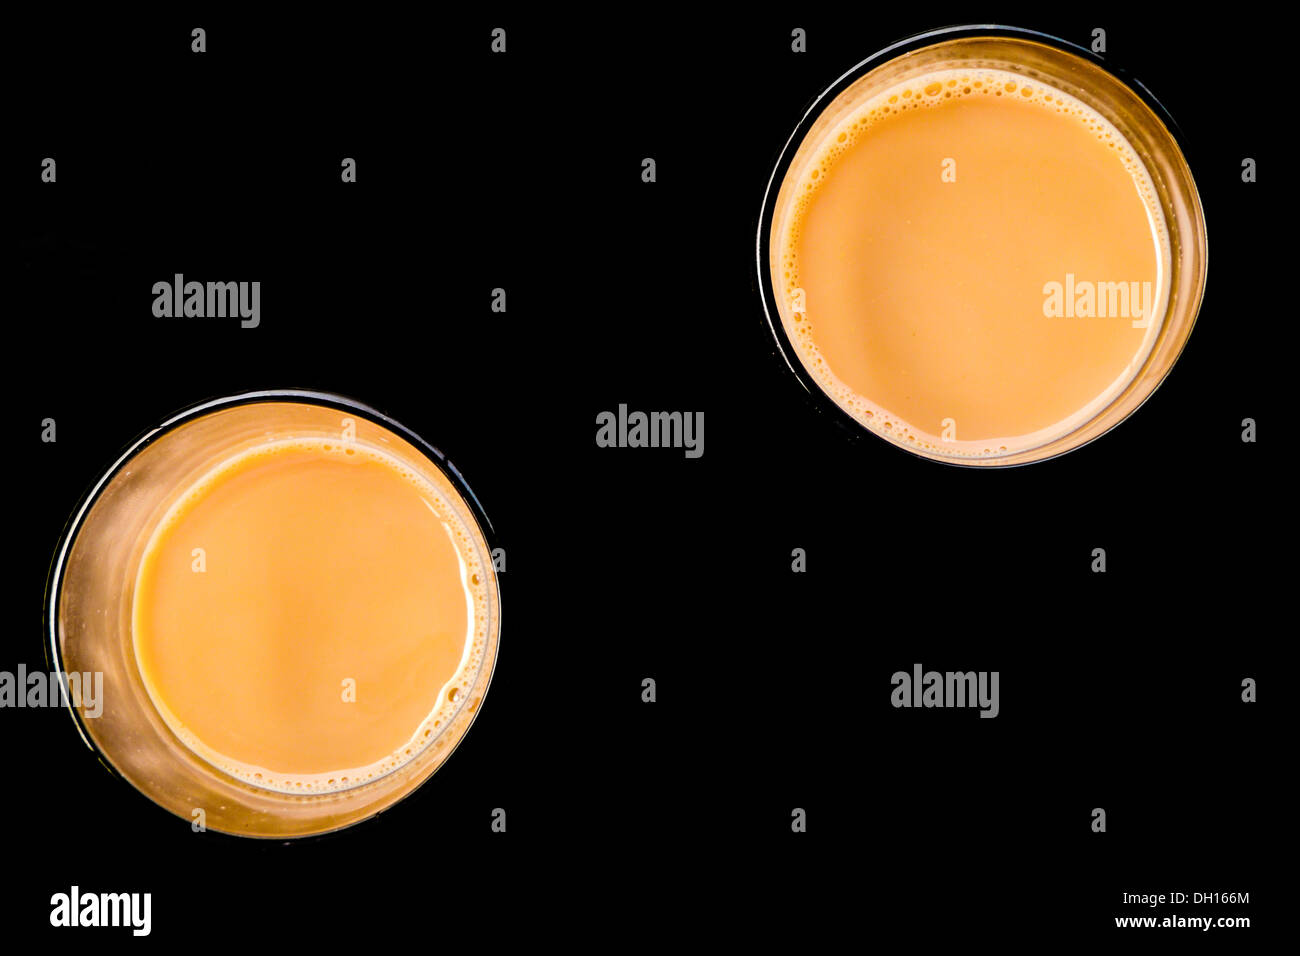 Abstract image of two cups of chai (Indian tea) brewed in a chai shop, Kerala, India Stock Photo